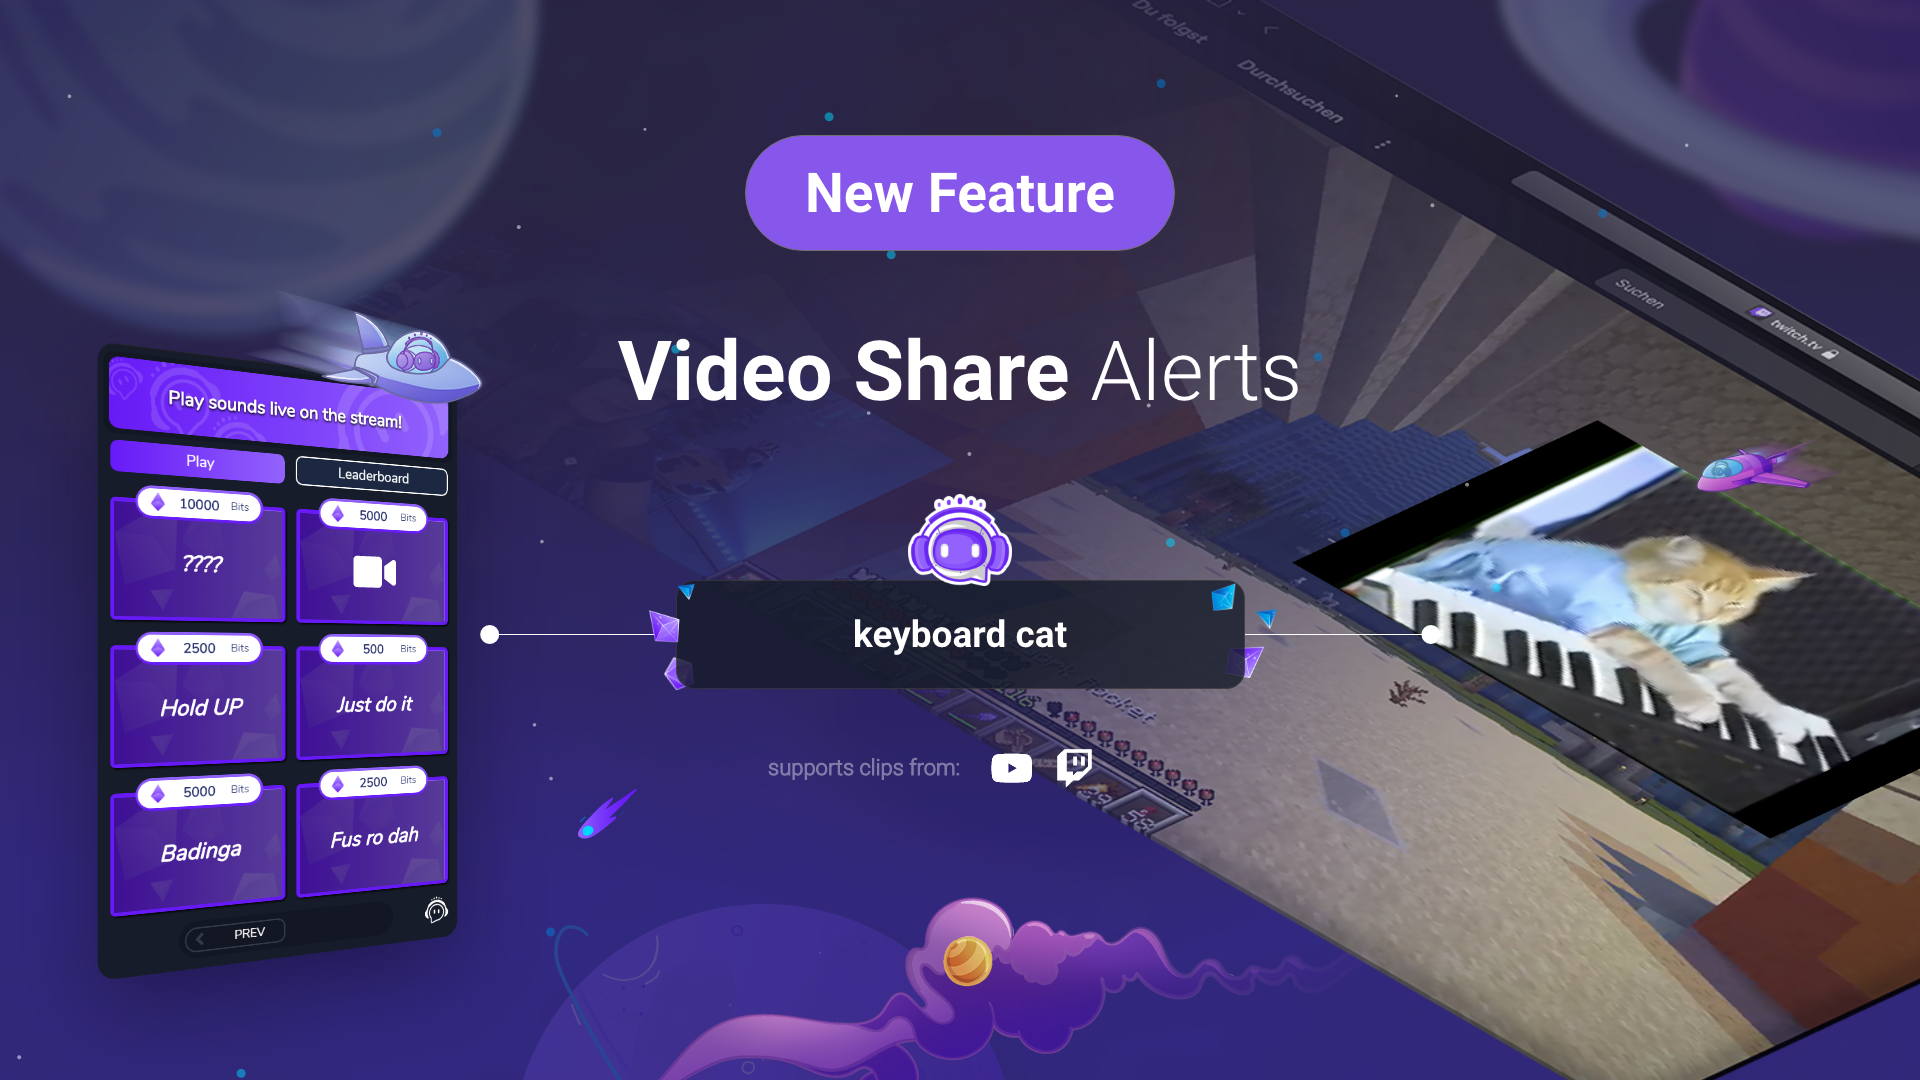 This image shows the Video Share Alerts Interface from the stream alerts tool Sound Alerts.